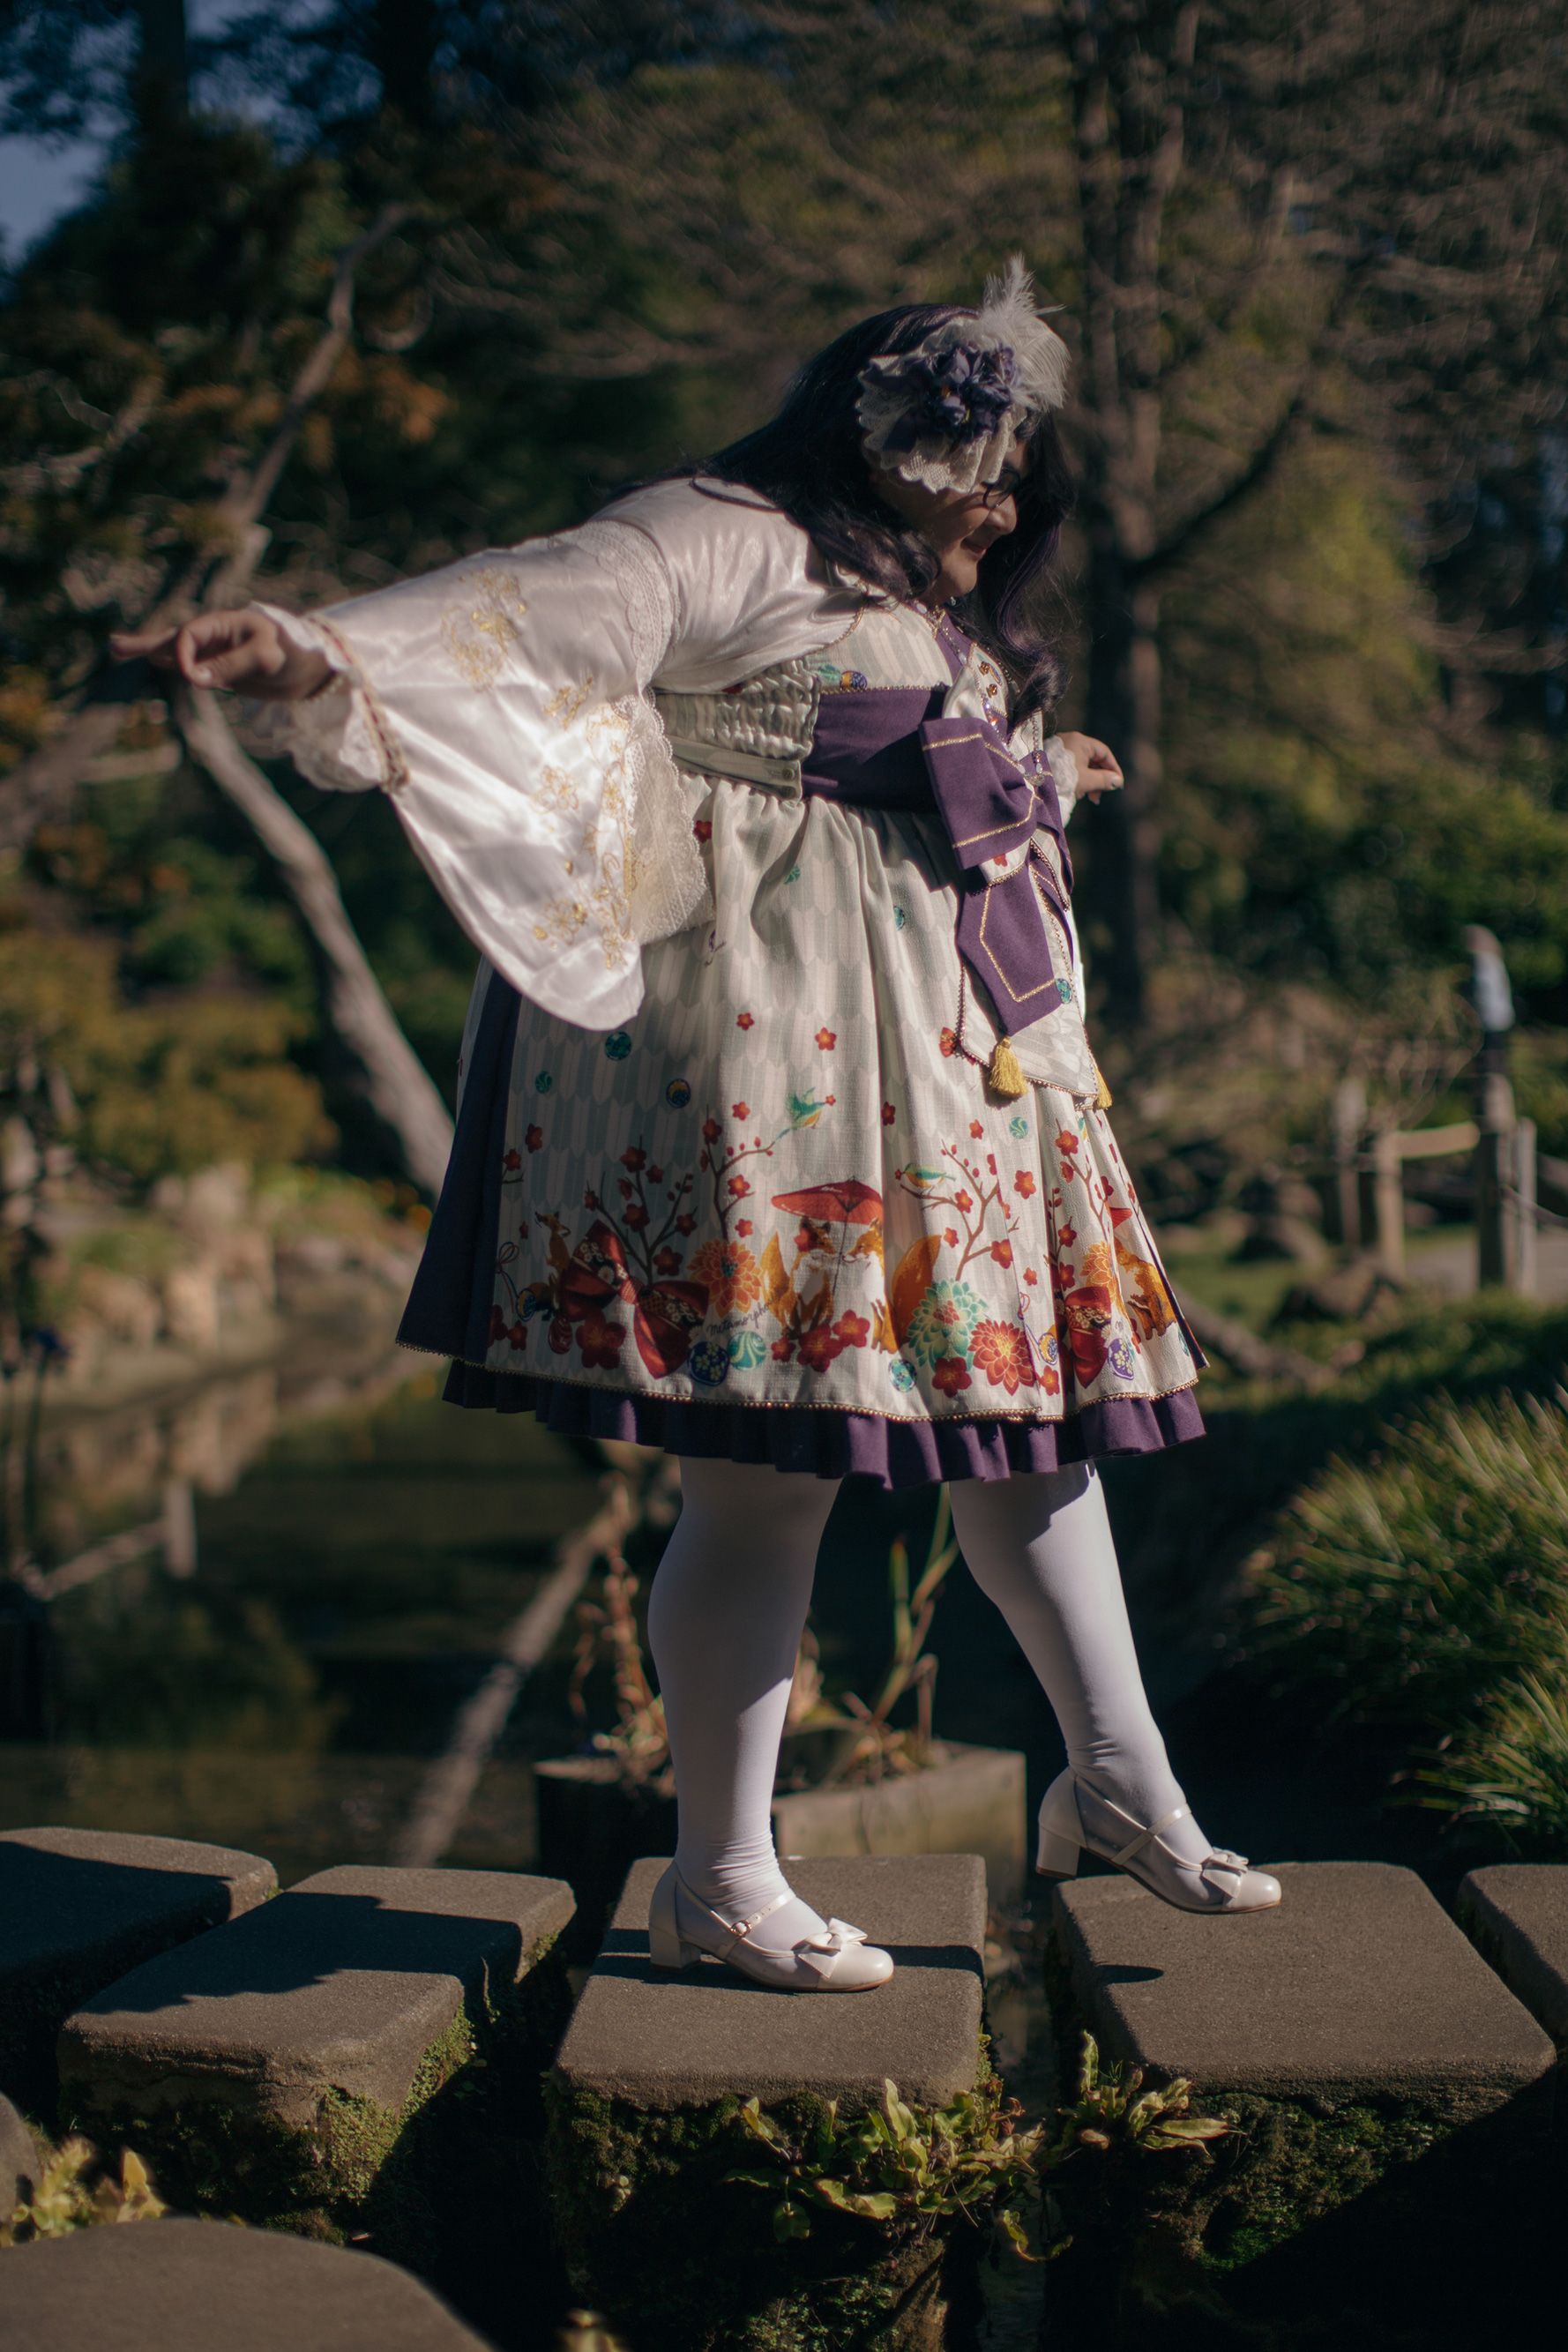 Bianca poses in a Wa (Kimono) style dress while at the Japanese Tea Garden in San Francisco, California, on Jan. 24, 2023. Lolita fashion encompasses a variety of aesthetics, including cute, gothic, classic, and sweet.